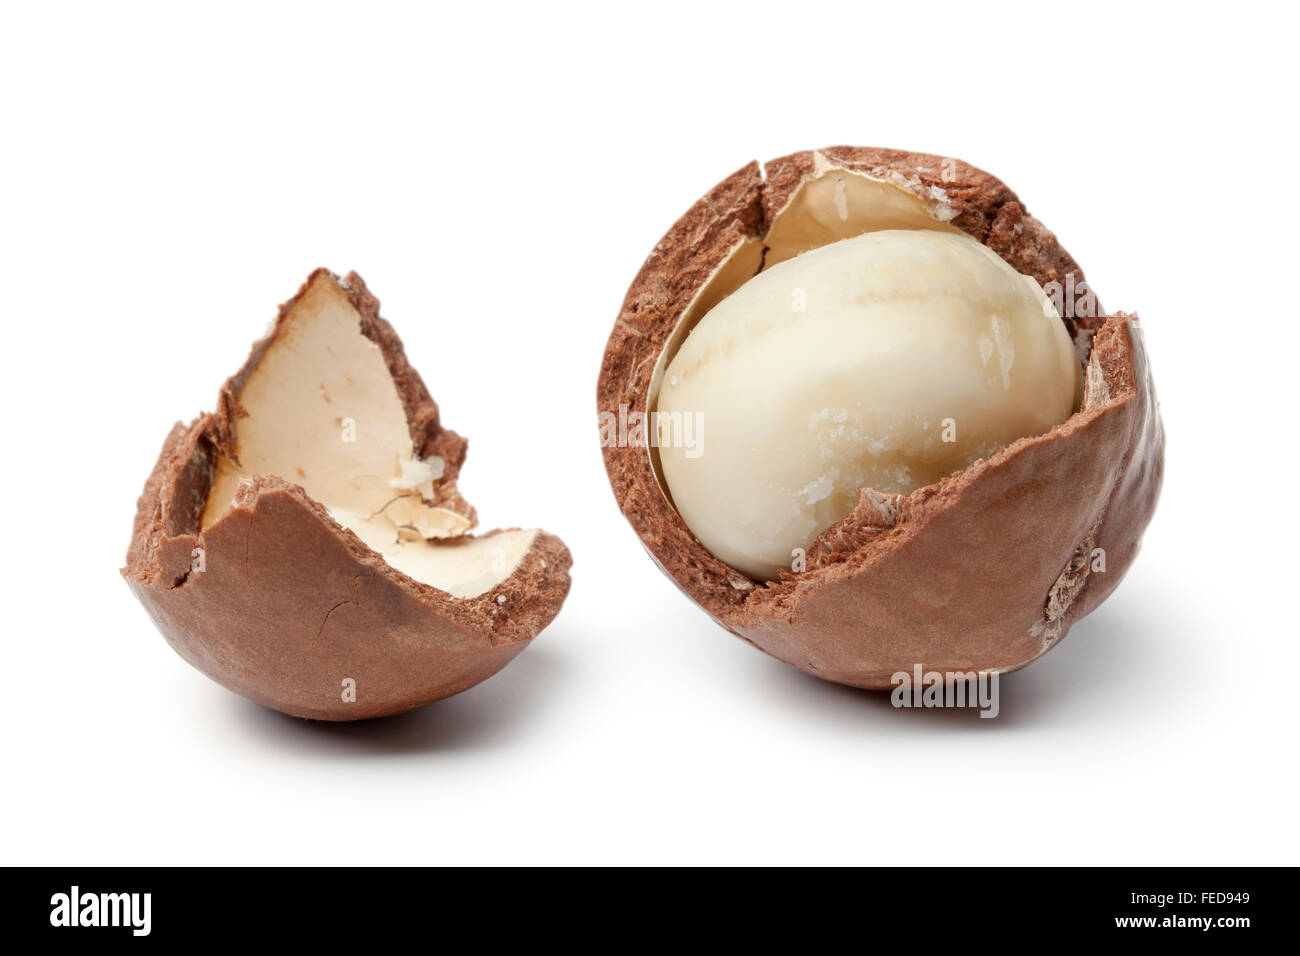 Macadamia nut in a broken shell on white background Stock Photo